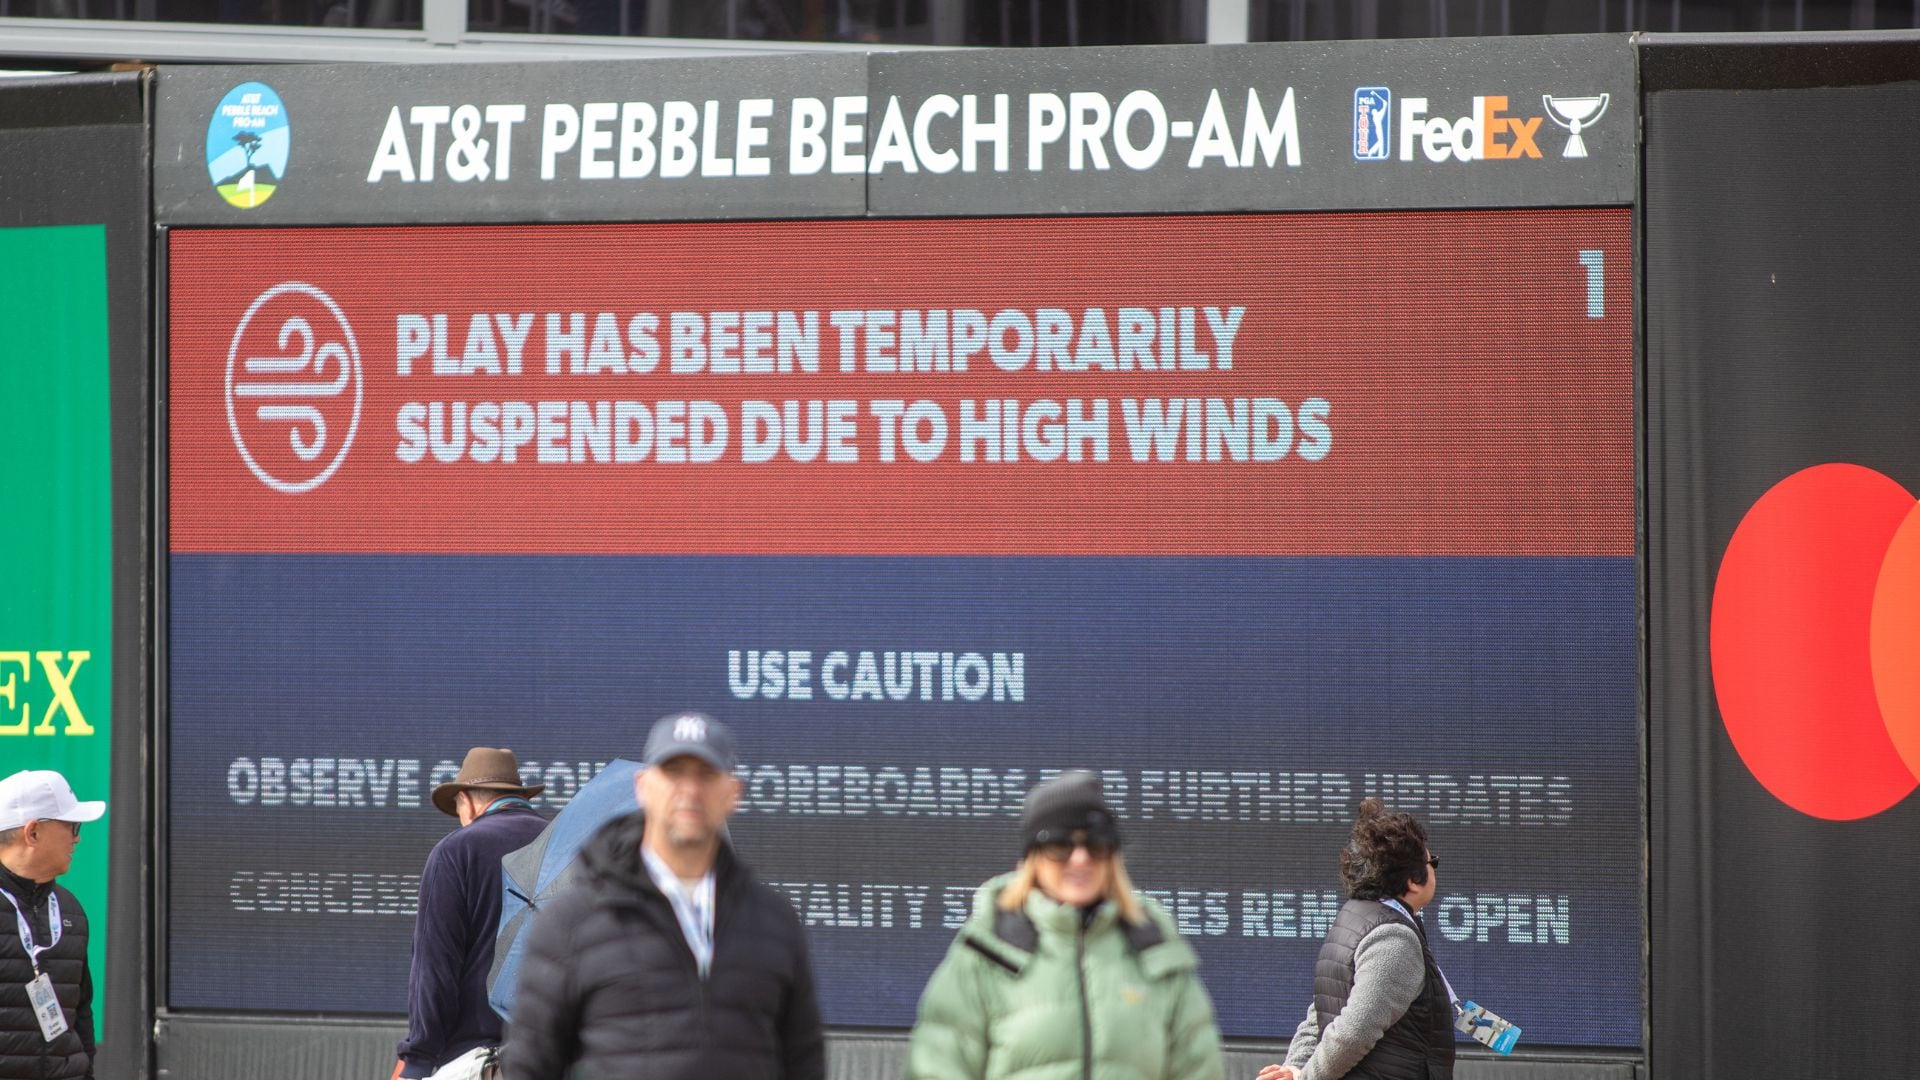 Heavy winds suspended play Saturday at AT&T Pebble Beach Pro-Am, Monday finish likely